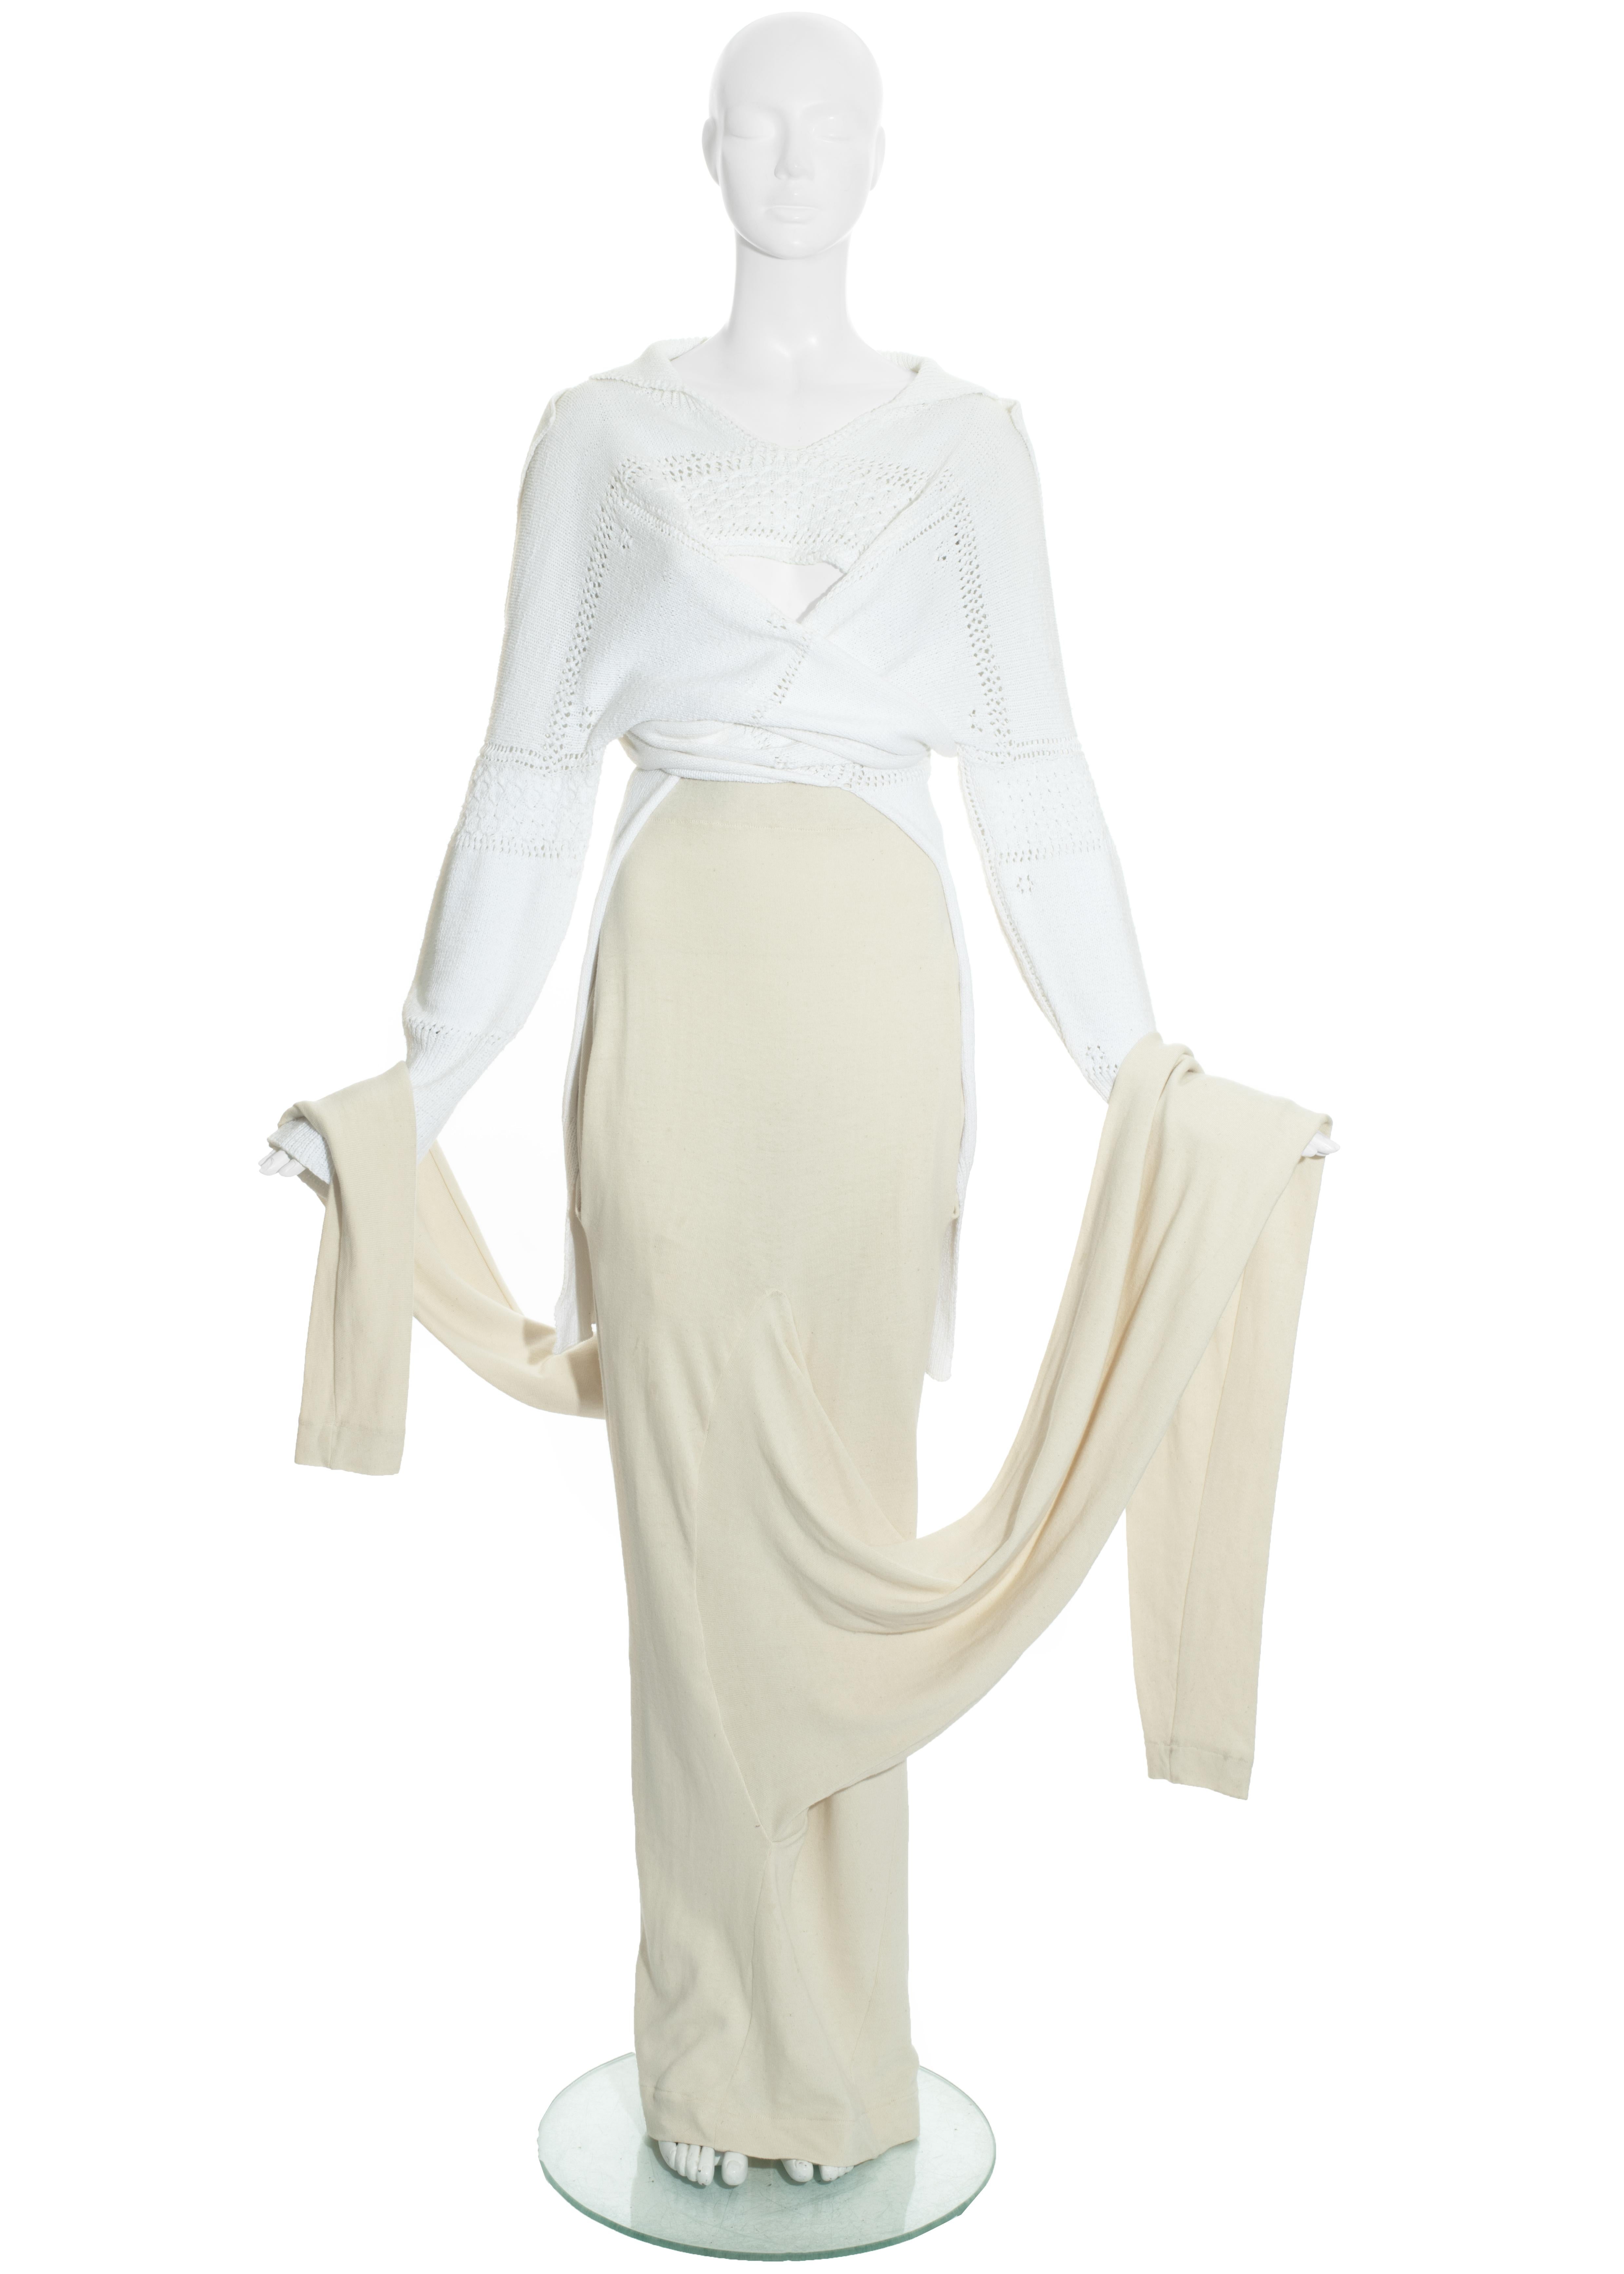 John Galliano skirt suit comprising: white knitted cotton sweater with two sleeves used as button-up fastenings, cream ribbed cotton maxi skirt with two extra long sleeves. 

'The Ludic Game' Autumn-Winter 1985